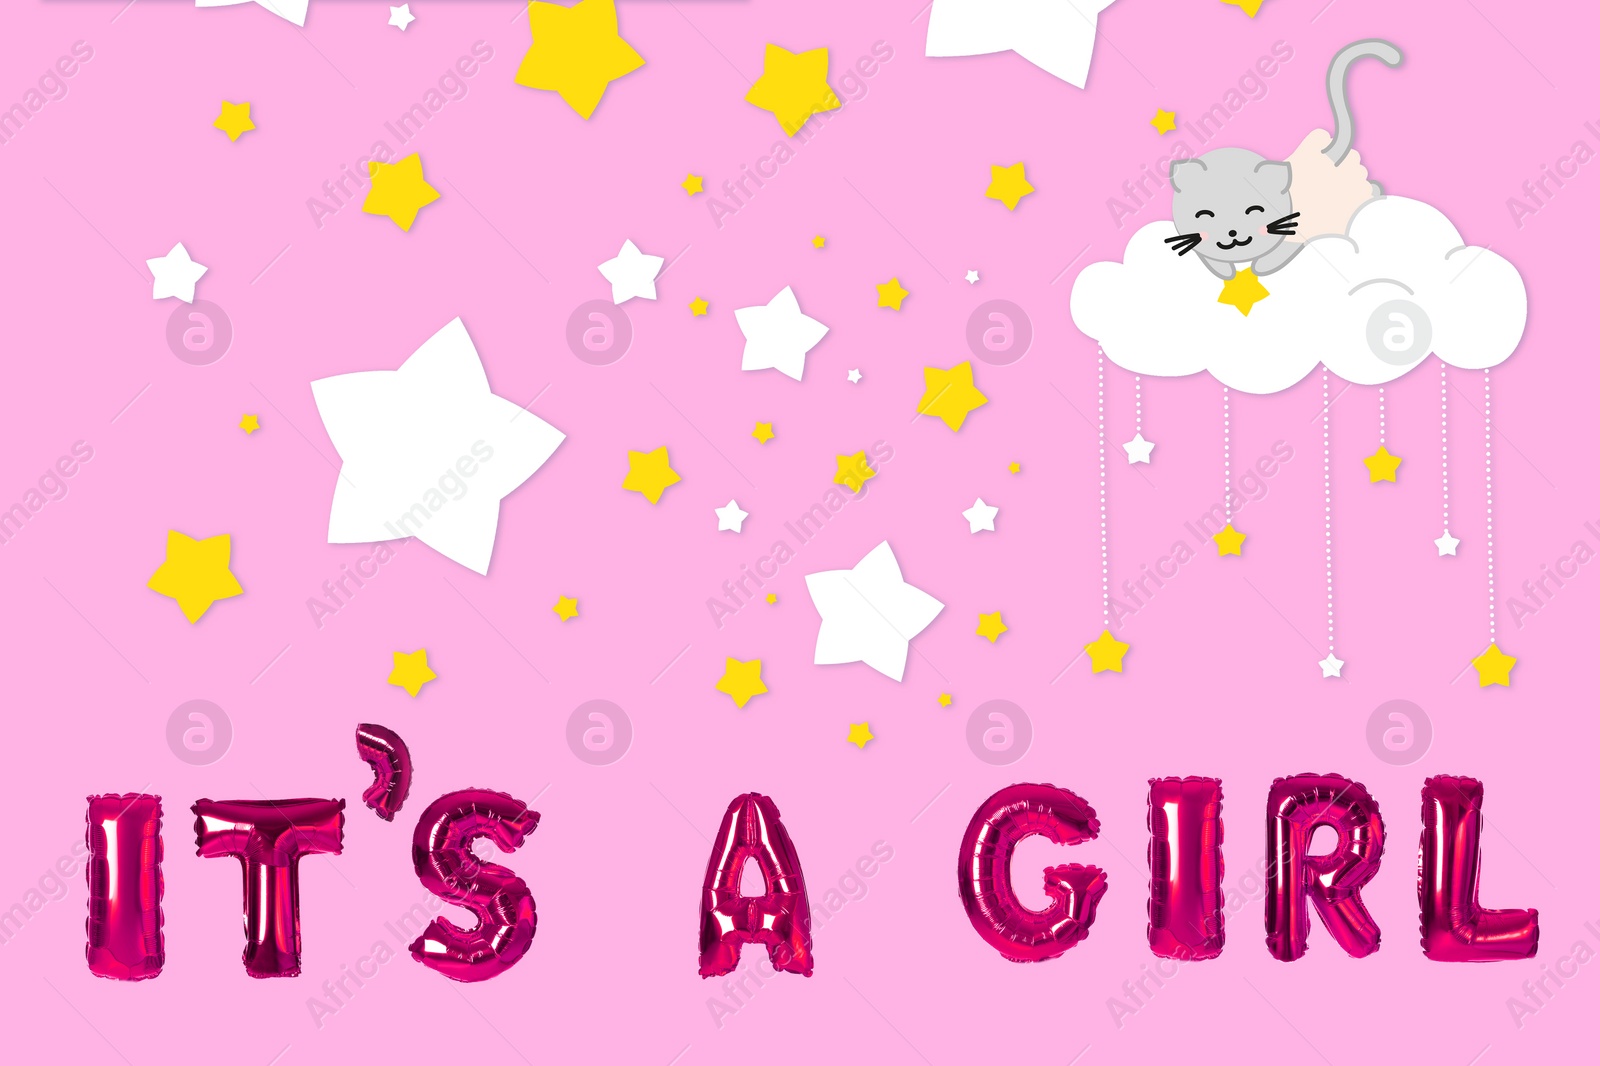 Image of Phrase ITS A GIRL made of foil balloon letters and stars on pink background. Baby shower party